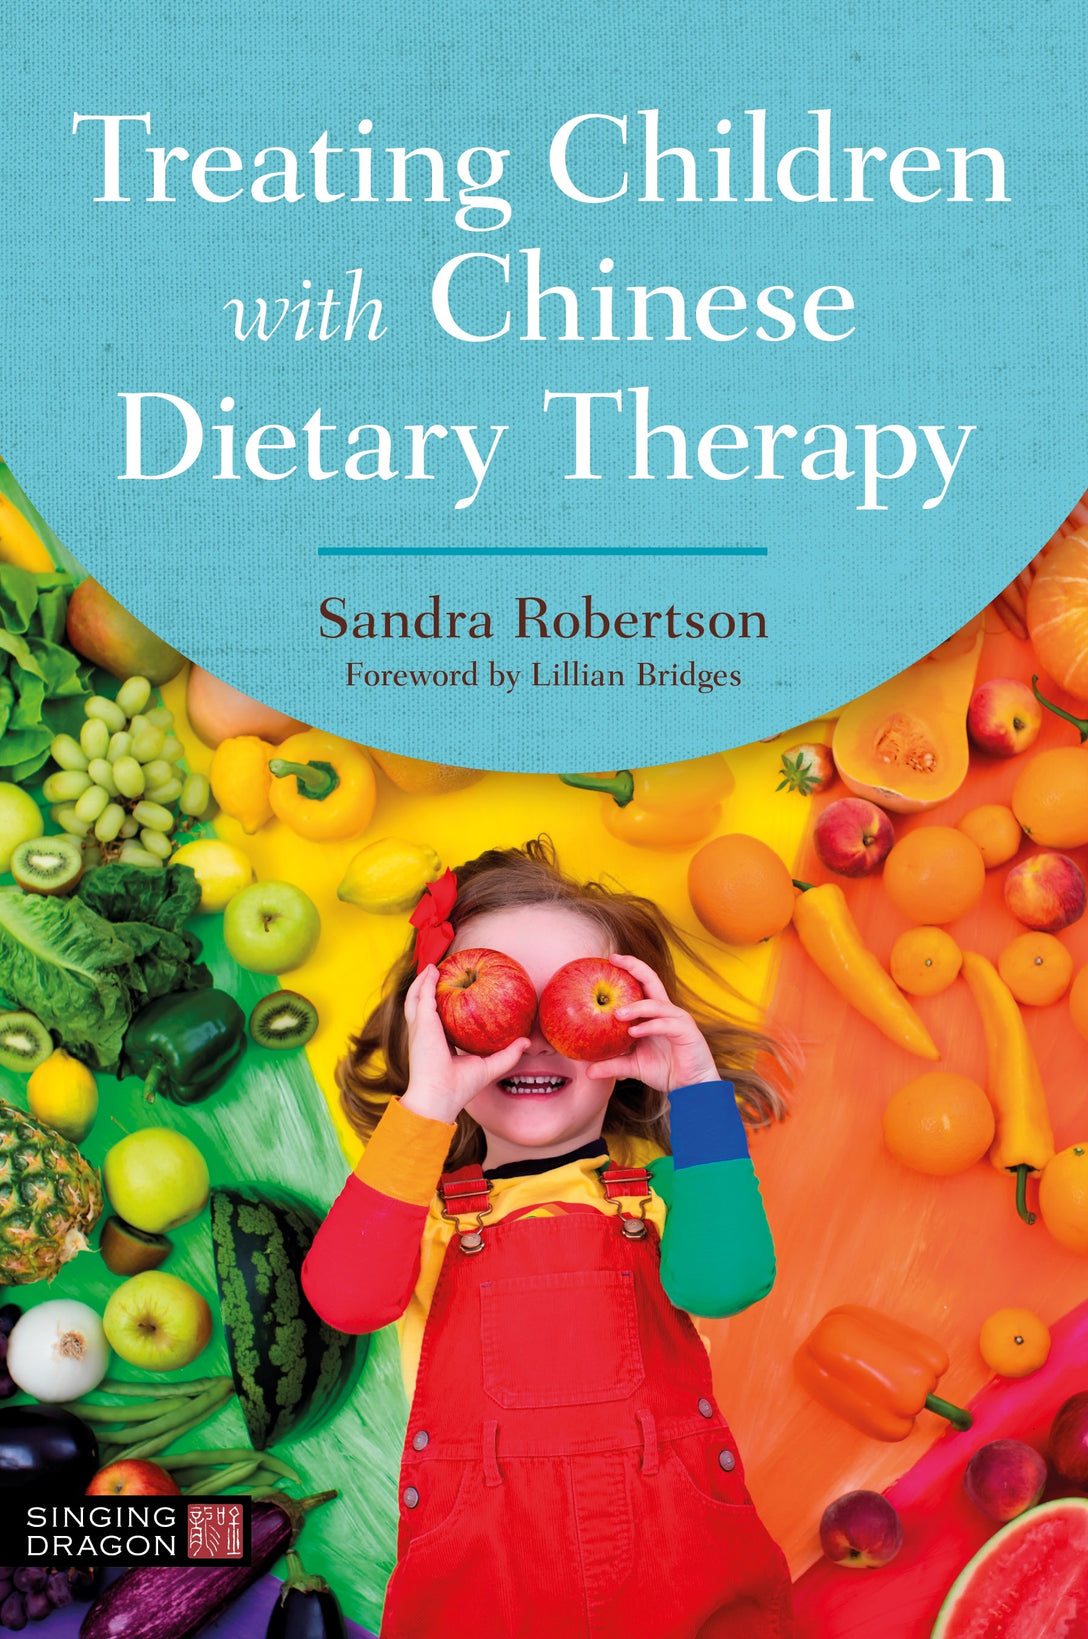 Treating Children with Chinese Dietary Therapy by Lillian Bridges, Sandra Robertson